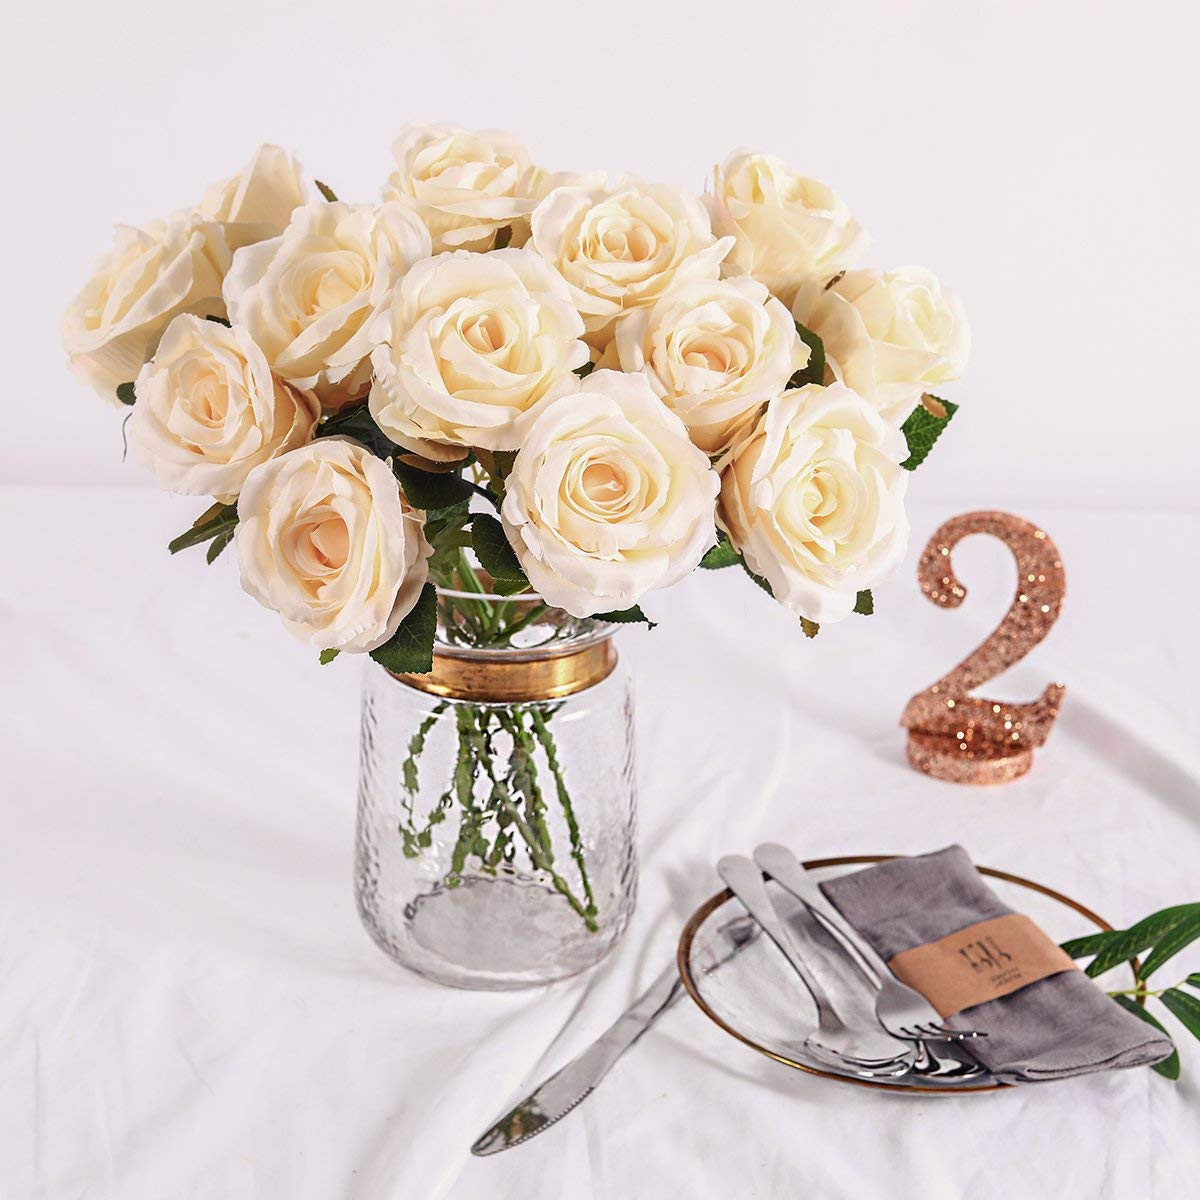 13 Stylish 9 Inch Cylinder Vases Dollar Tree 2024 free download 9 inch cylinder vases dollar tree of amazon com party joy vintage artificial silk rose flower bouquet with regard to amazon com party joy vintage artificial silk rose flower bouquet wedding 